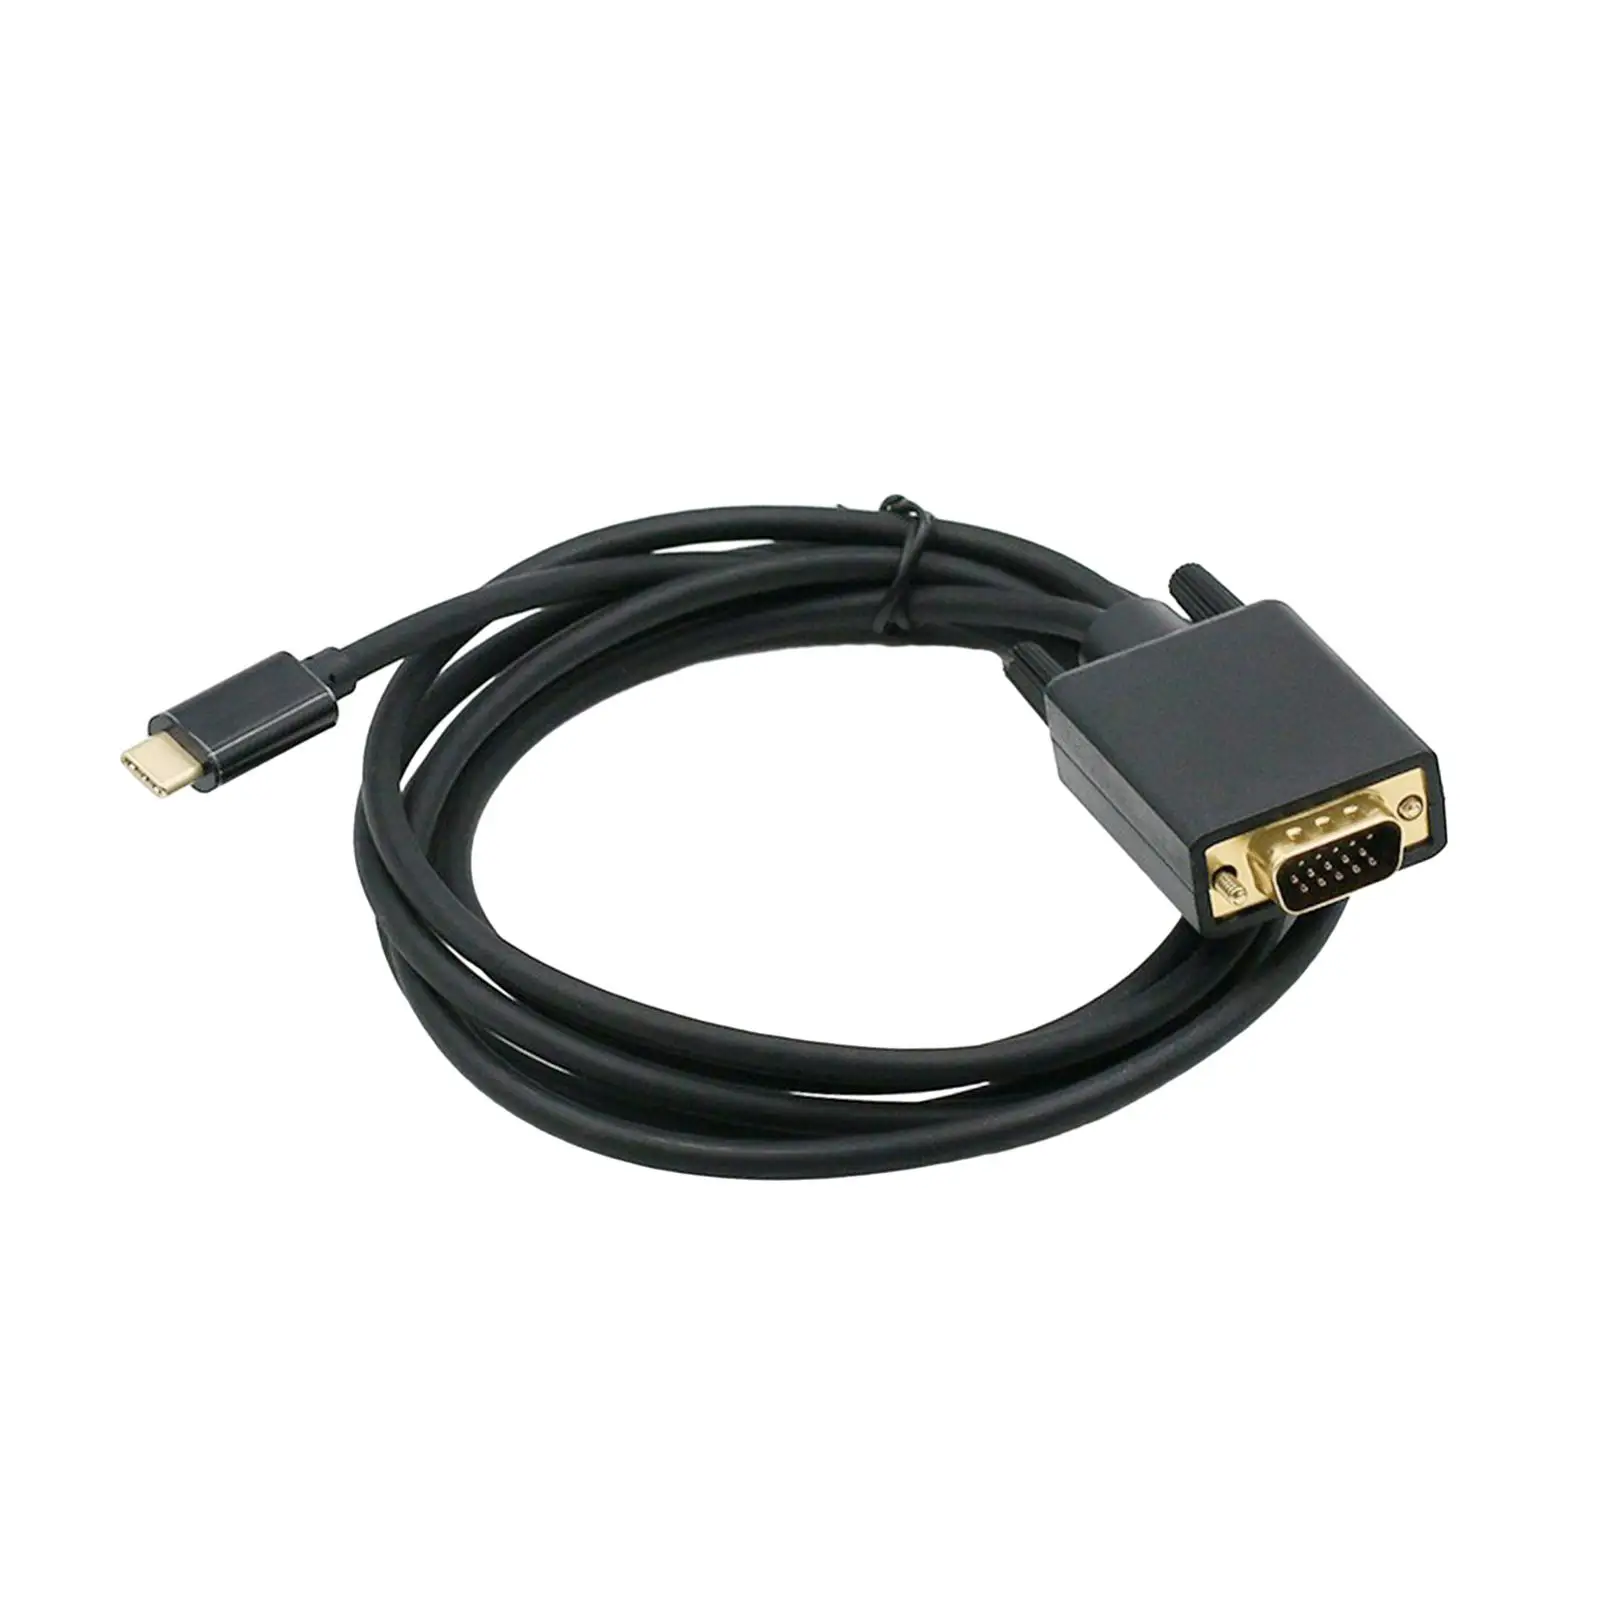 USB C to VGA Cable Monitors Computer USB Type C to VGA Conferences Smartphones Demo 1080P Trainings Gaming 6ft Converter Cable